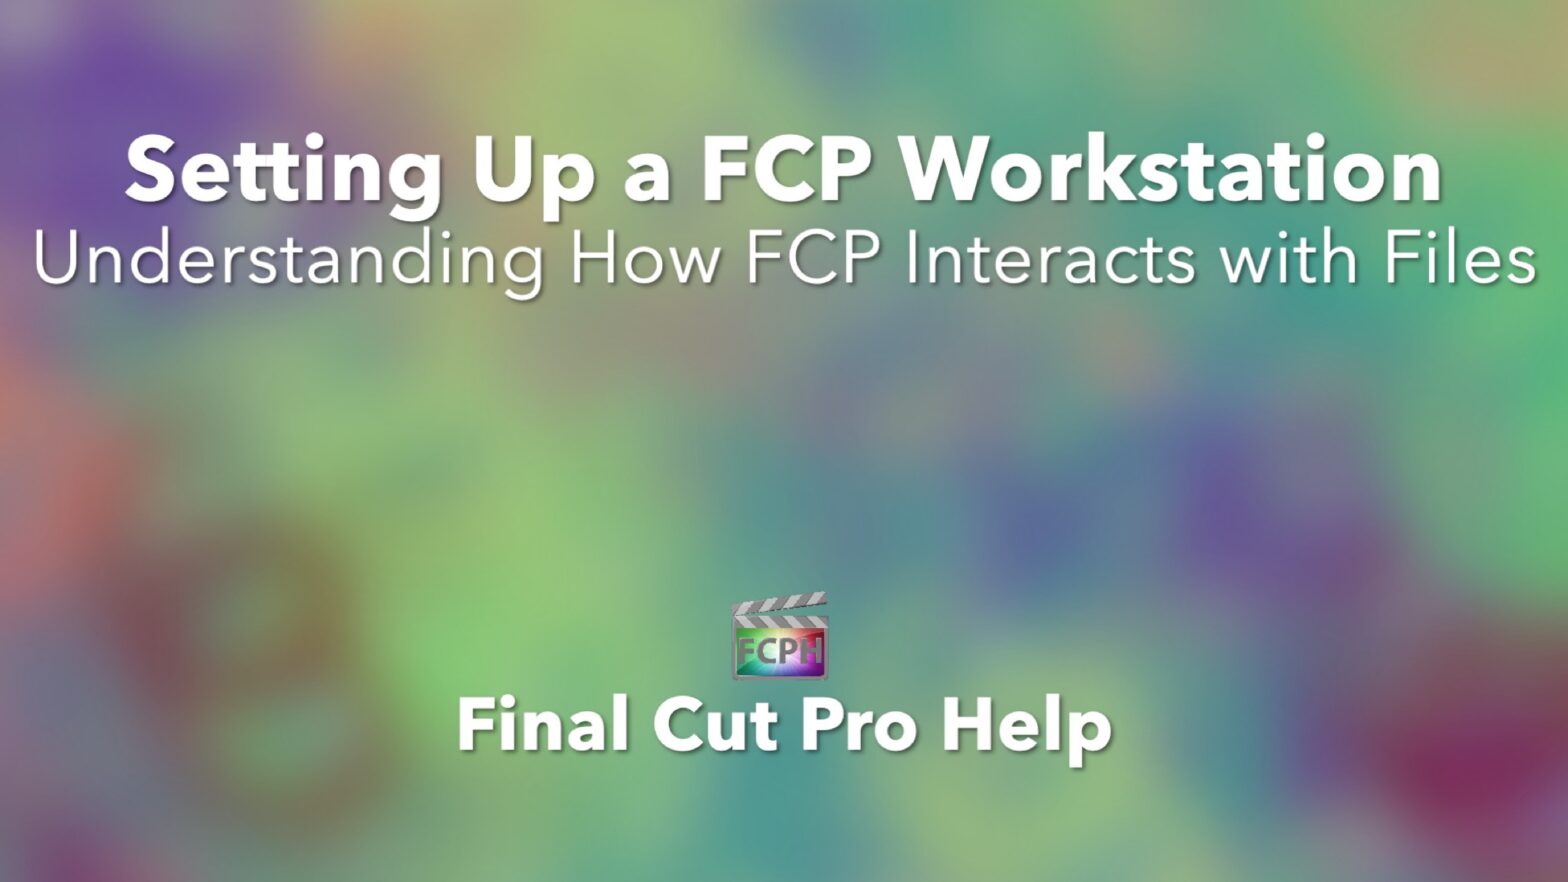 Setting Up a FCP Workstation How Final Cut Pro Interacts with Files